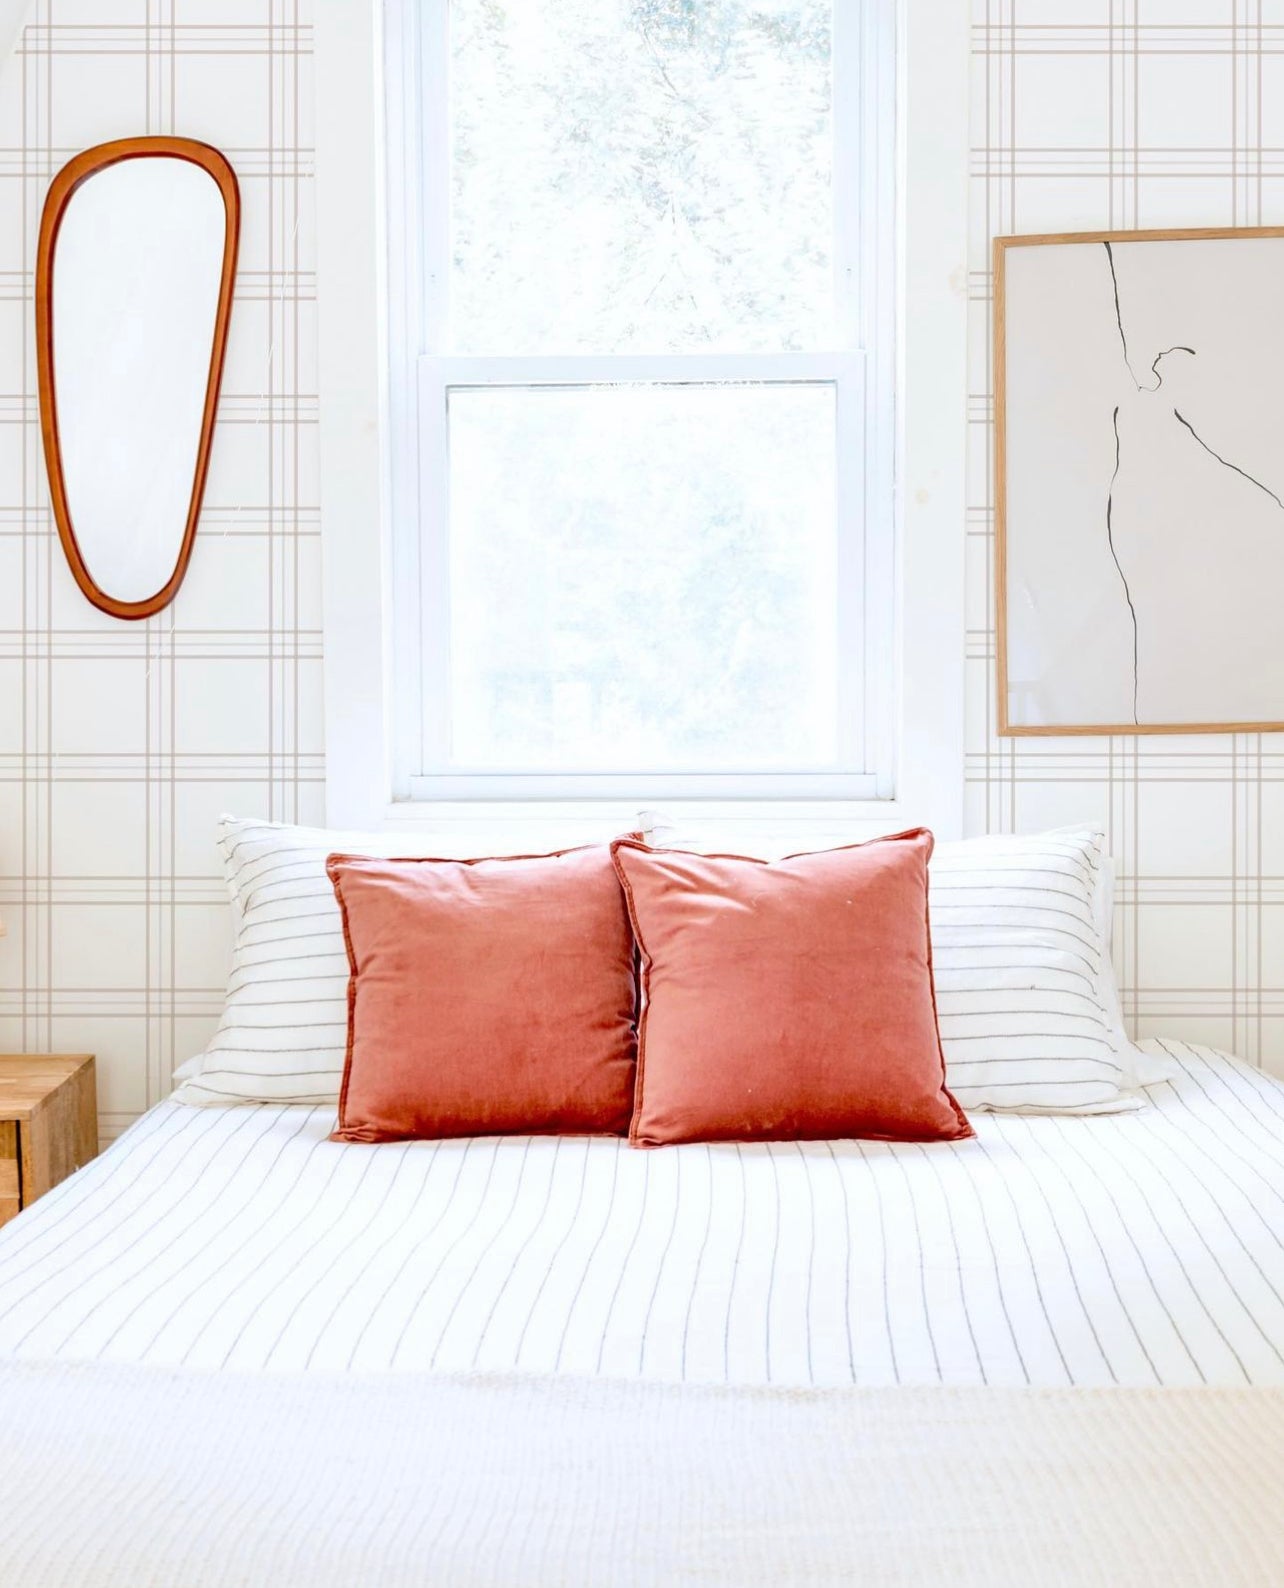 A bright bedroom setting featuring Traditional Tartan Plaid Wallpaper as the backdrop to a comfortable bed dressed in white and accented with coral pillows, the simplicity of the decor complemented by a vintage oval wooden mirror, evoking a sense of timeless elegance.